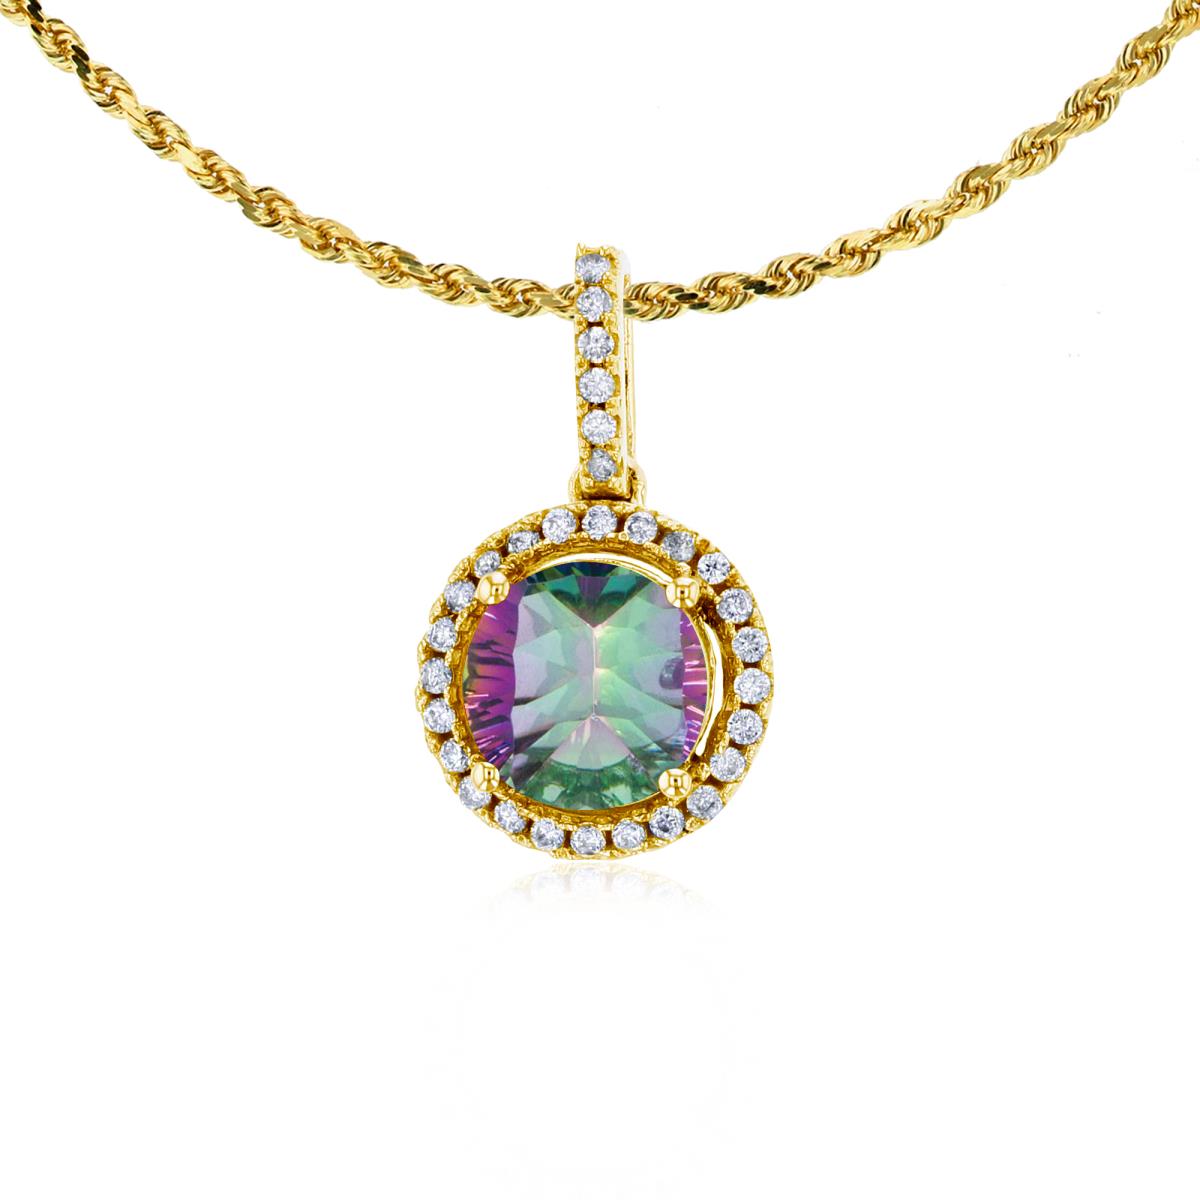 10K Yellow Gold 7mm Round Mystic Green Topaz & 0.15 CTTW Round Diamonds Halo 18" Rope Chain Necklace